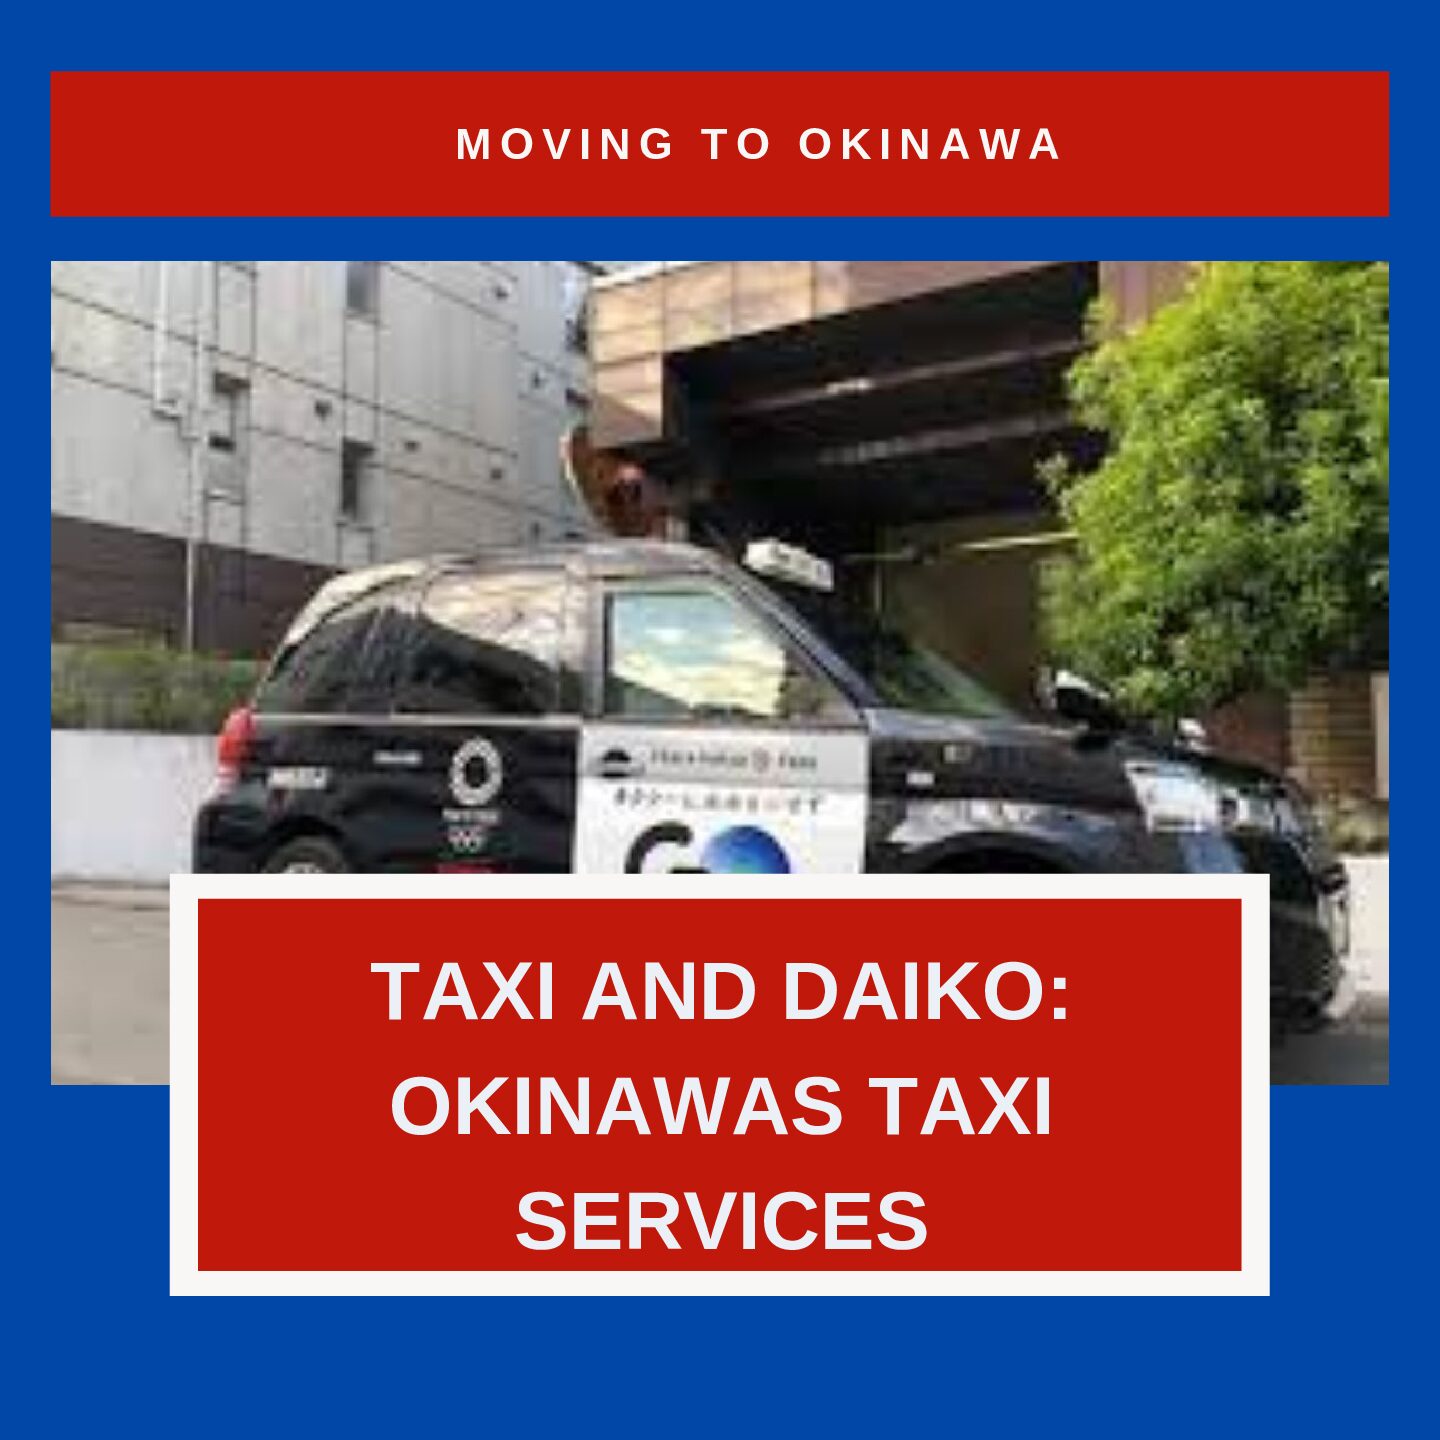 Taxi and Daiko: Okinawa’s Most Useful Taxi Services